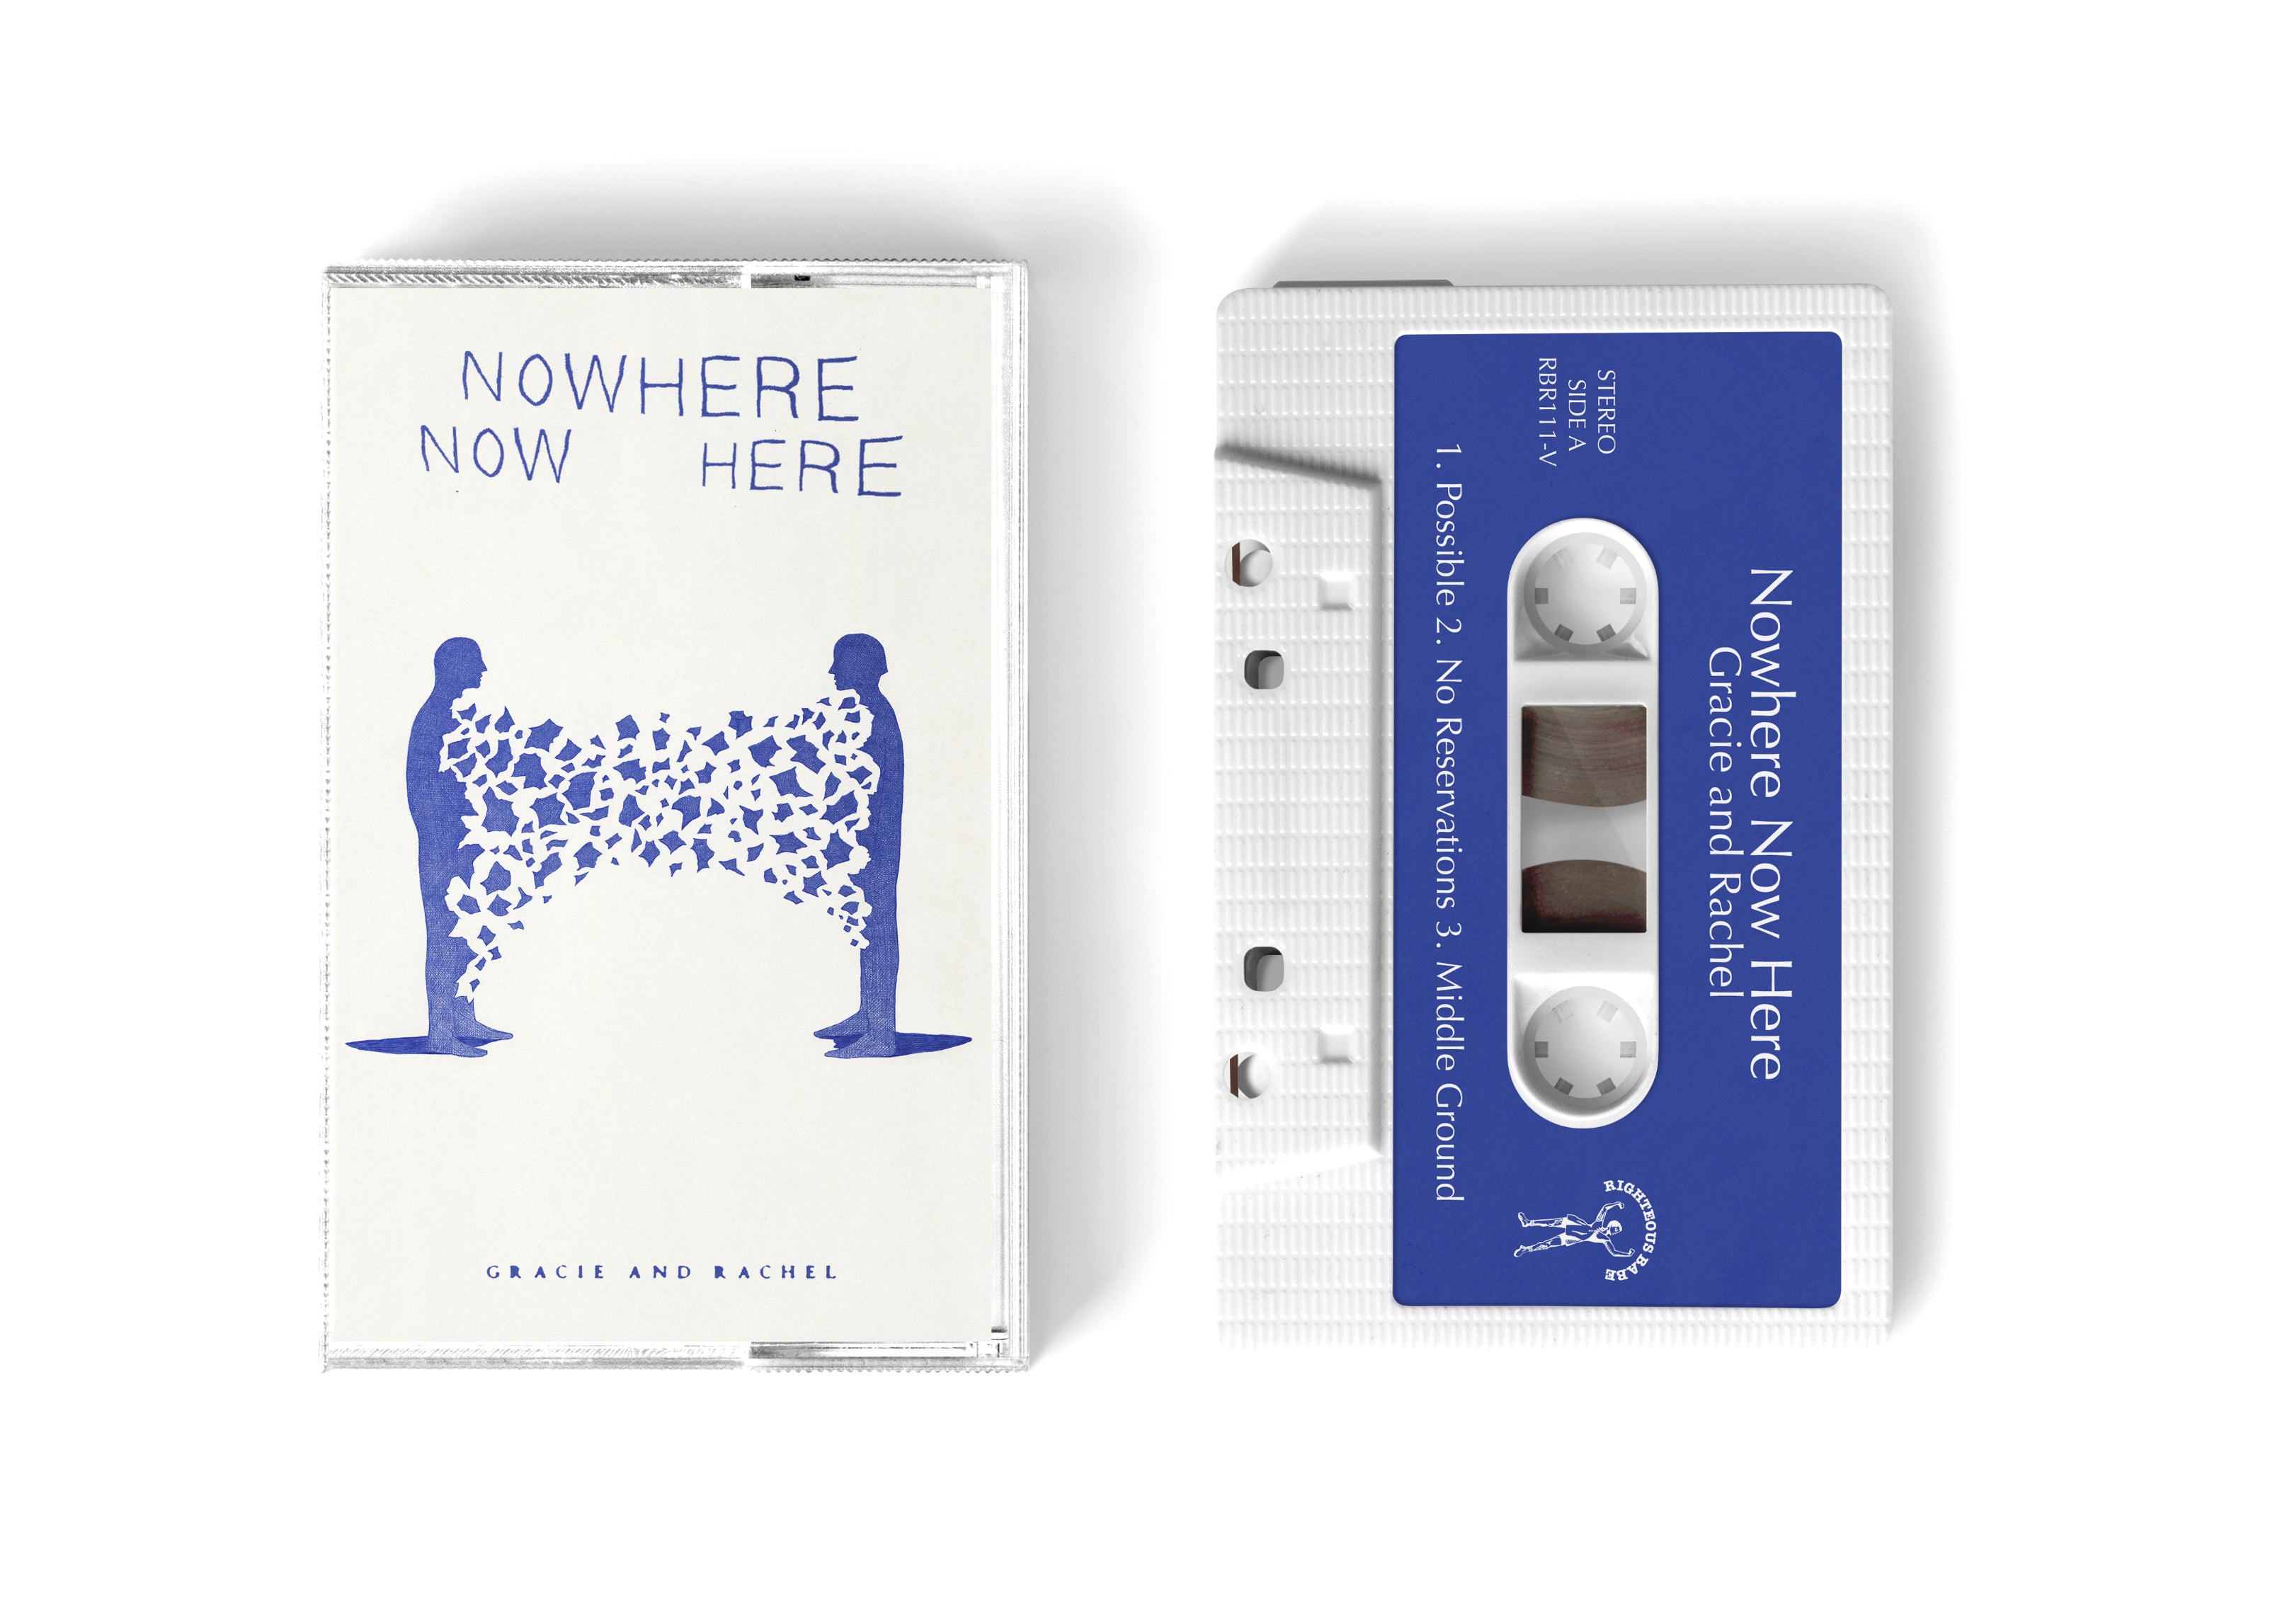 Gracie and Rachel - Nowhere Now Here (EP) – Righteous Babe Records